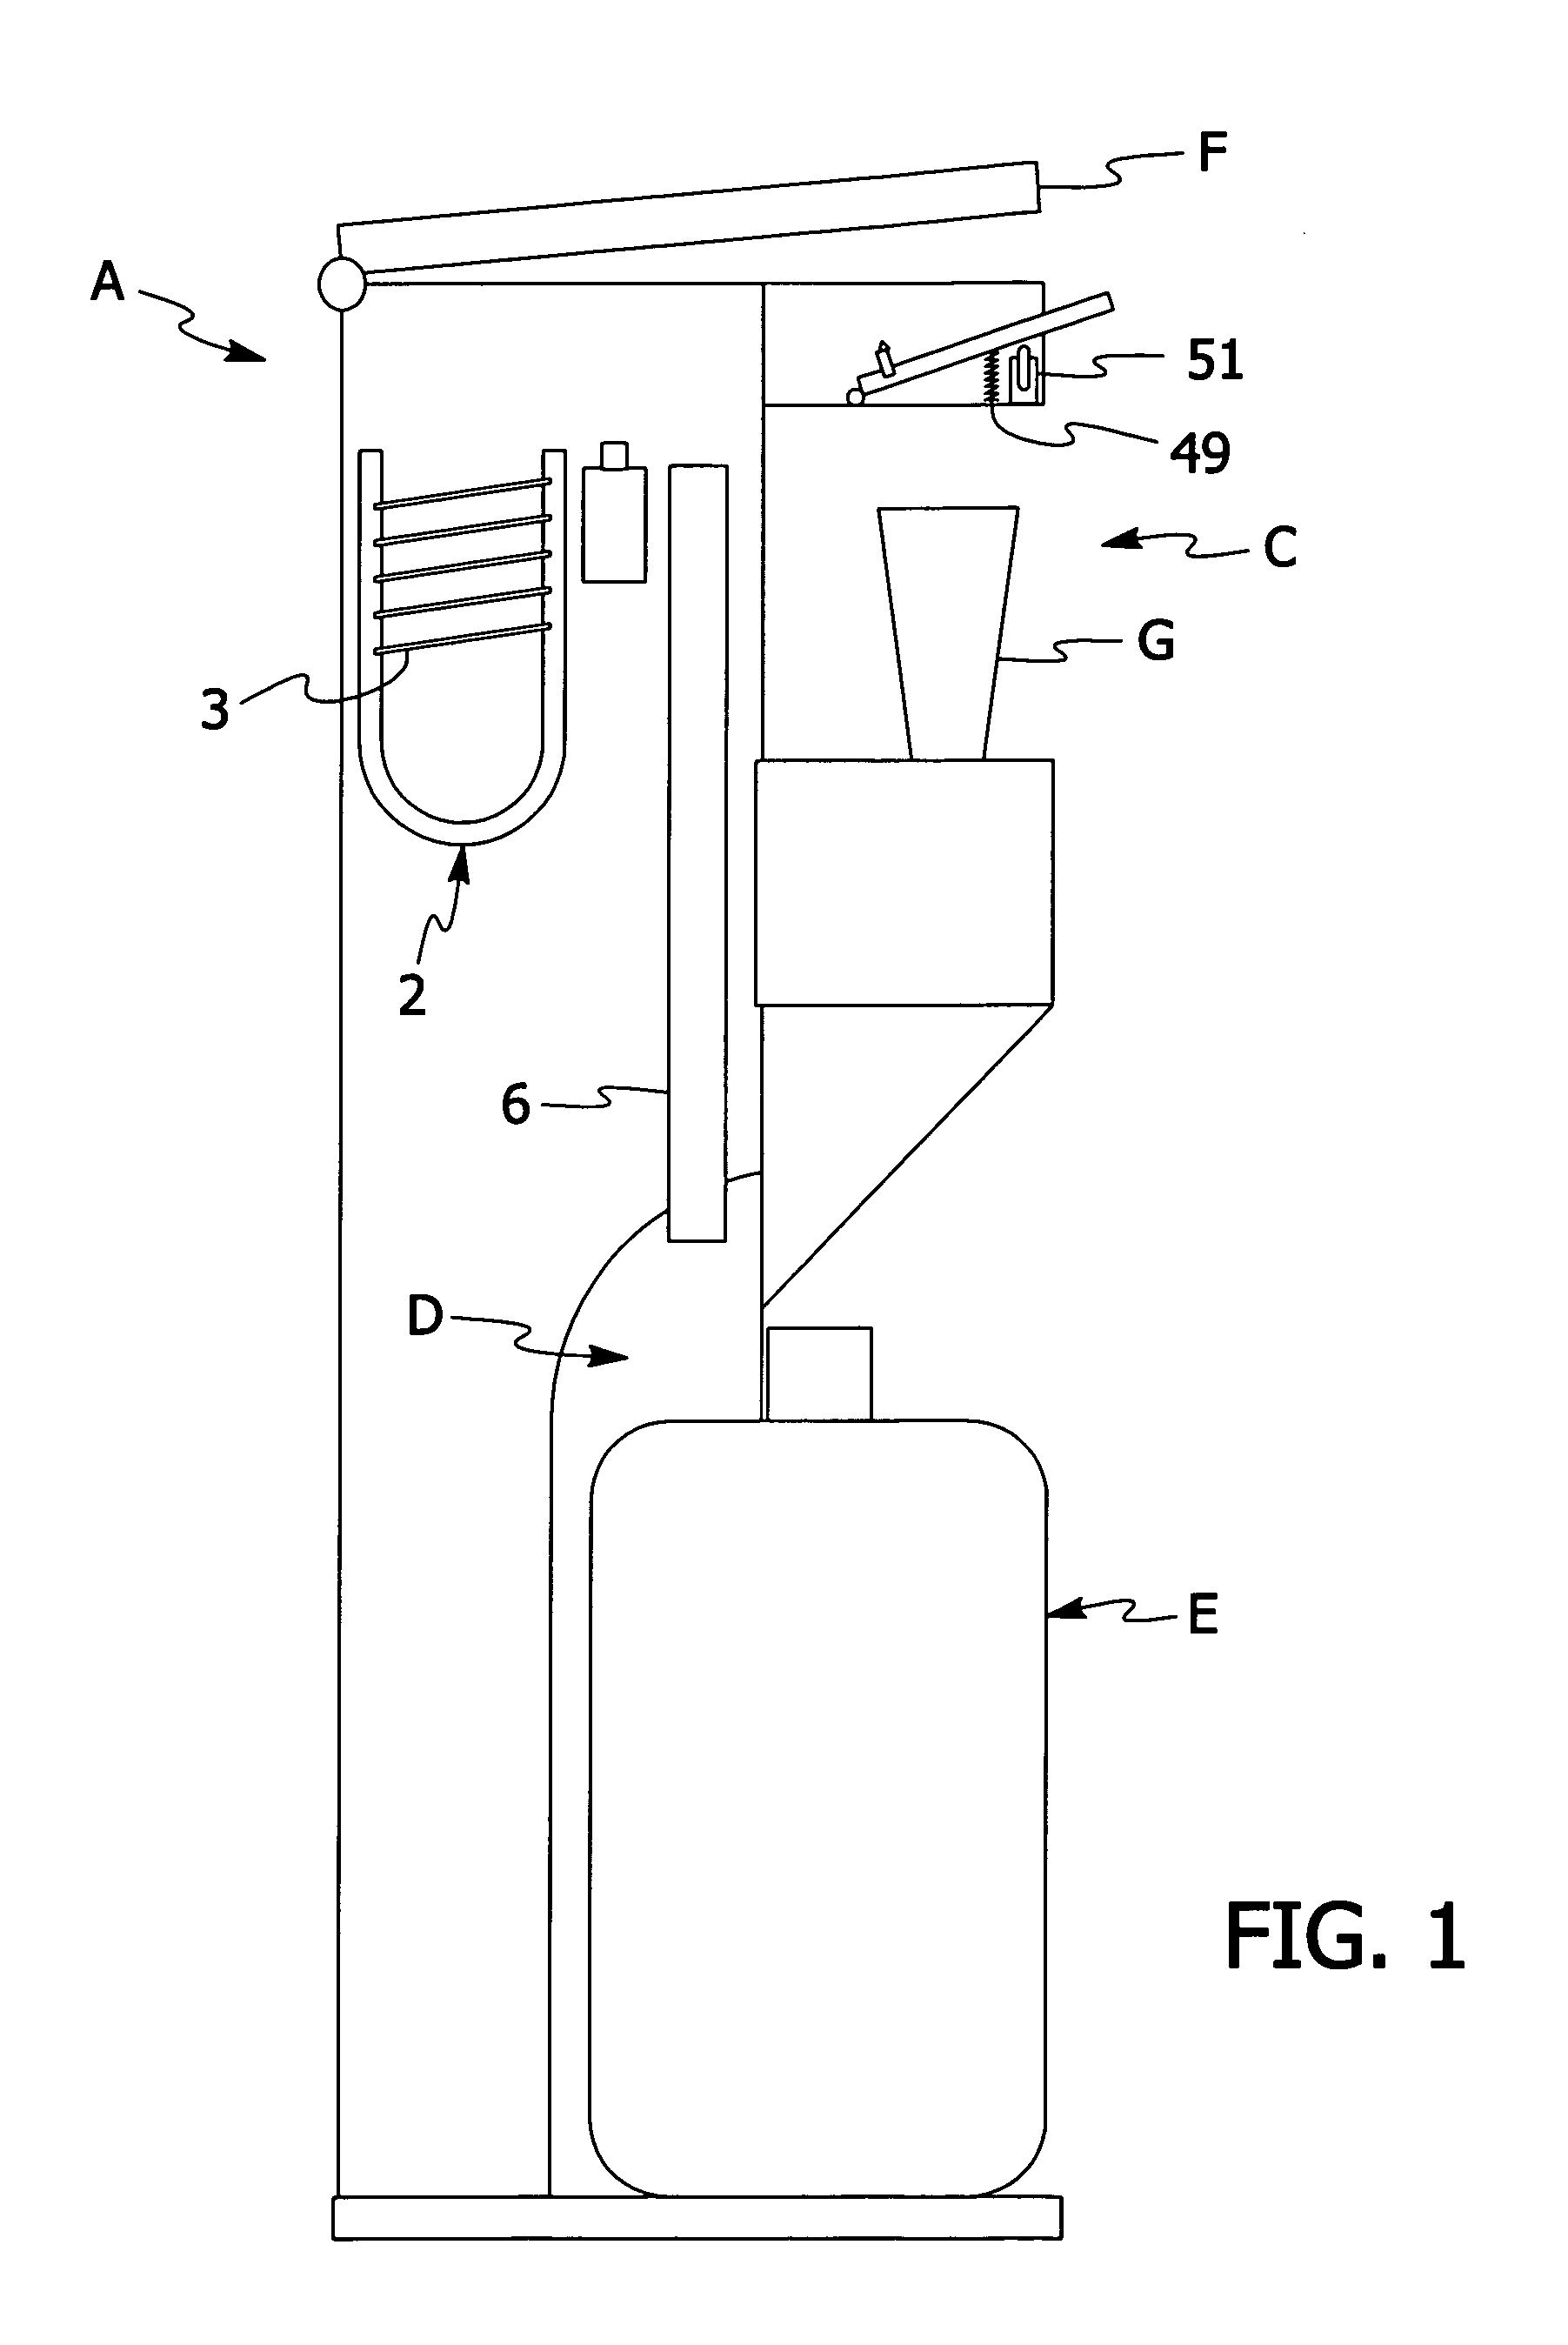 Apparatus for dispensing a liquid from a liquid storage container